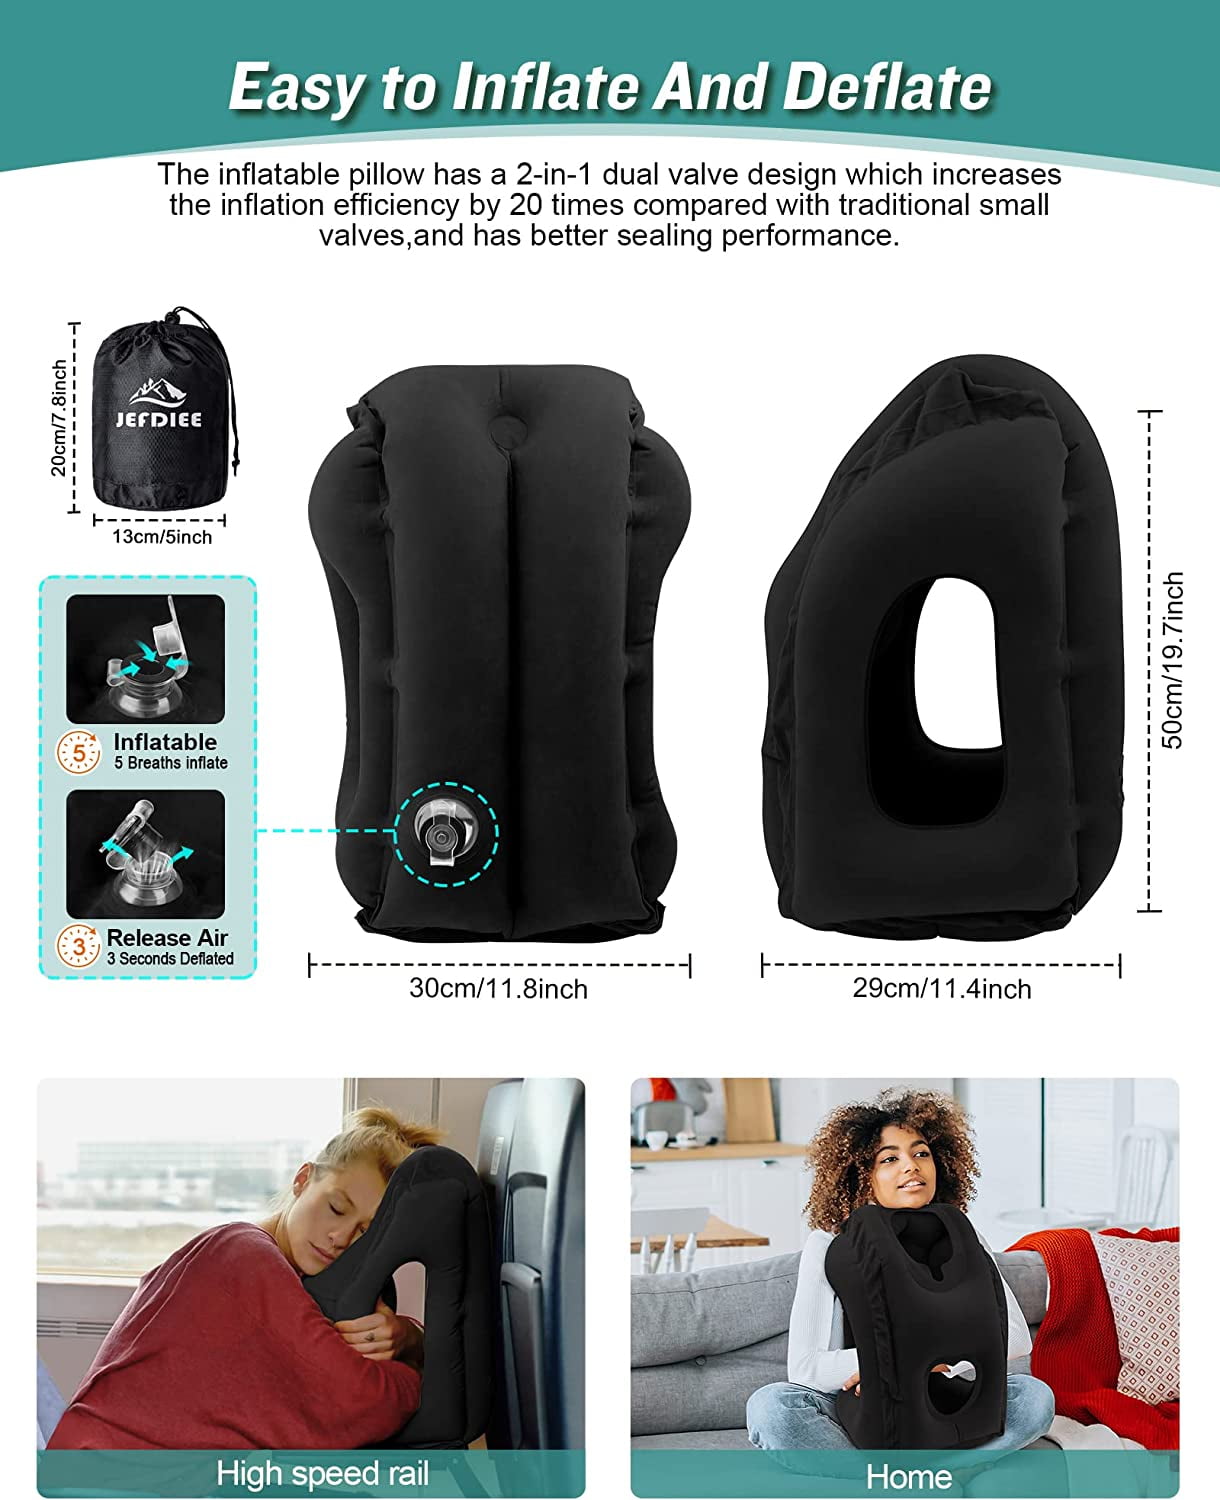 KINSCO Inflatable Travel Pillow，Airplane Neck Pillow for Airplane, Train,  car Backseat, Office Lunch Break, Provides You a Comfortable Sleeping